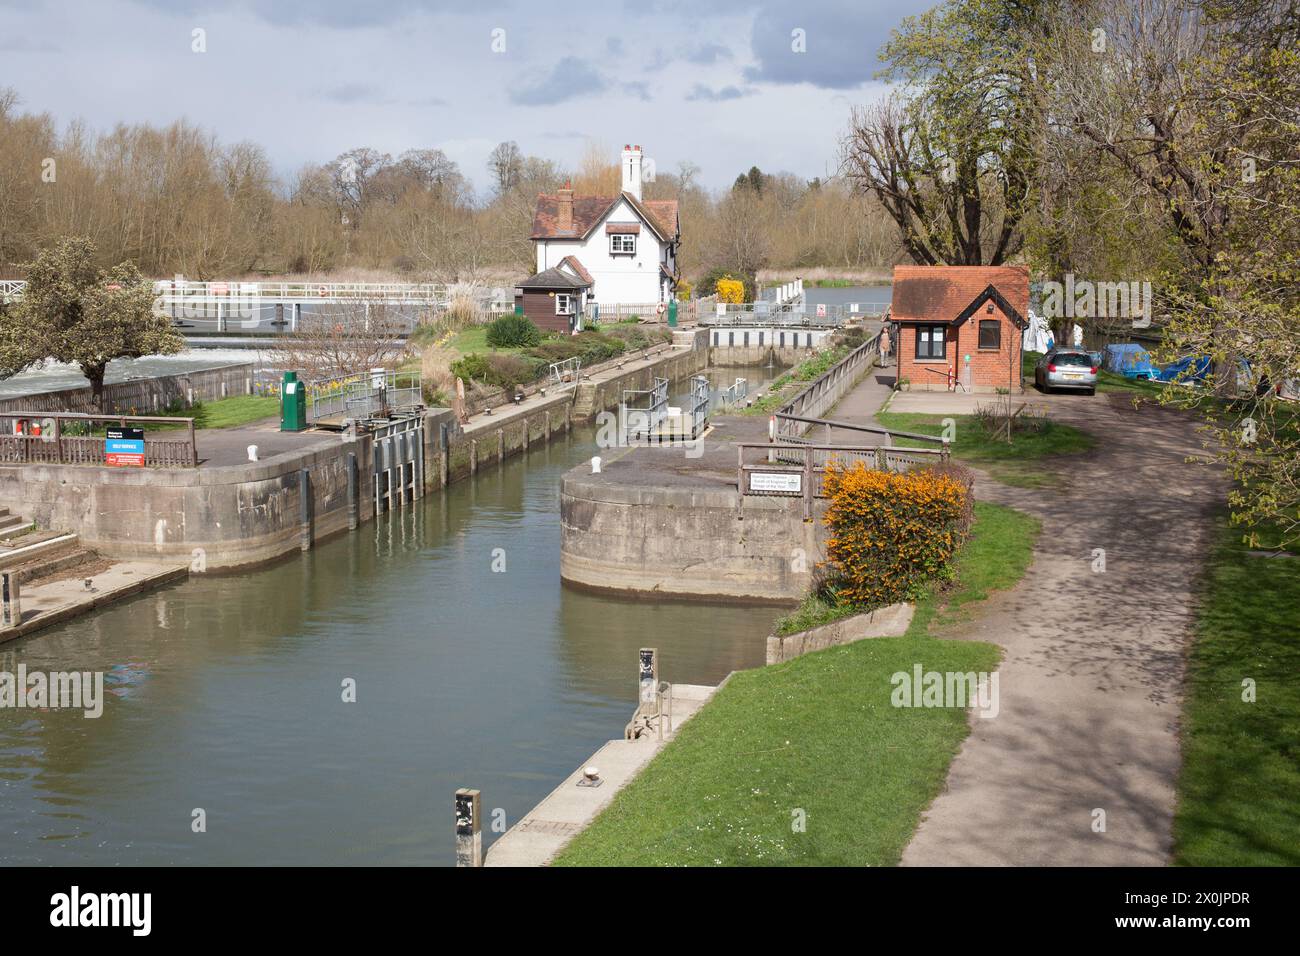 Views of The Thames at Goring in Oxfordshire in the United Kingdom Stock Photo